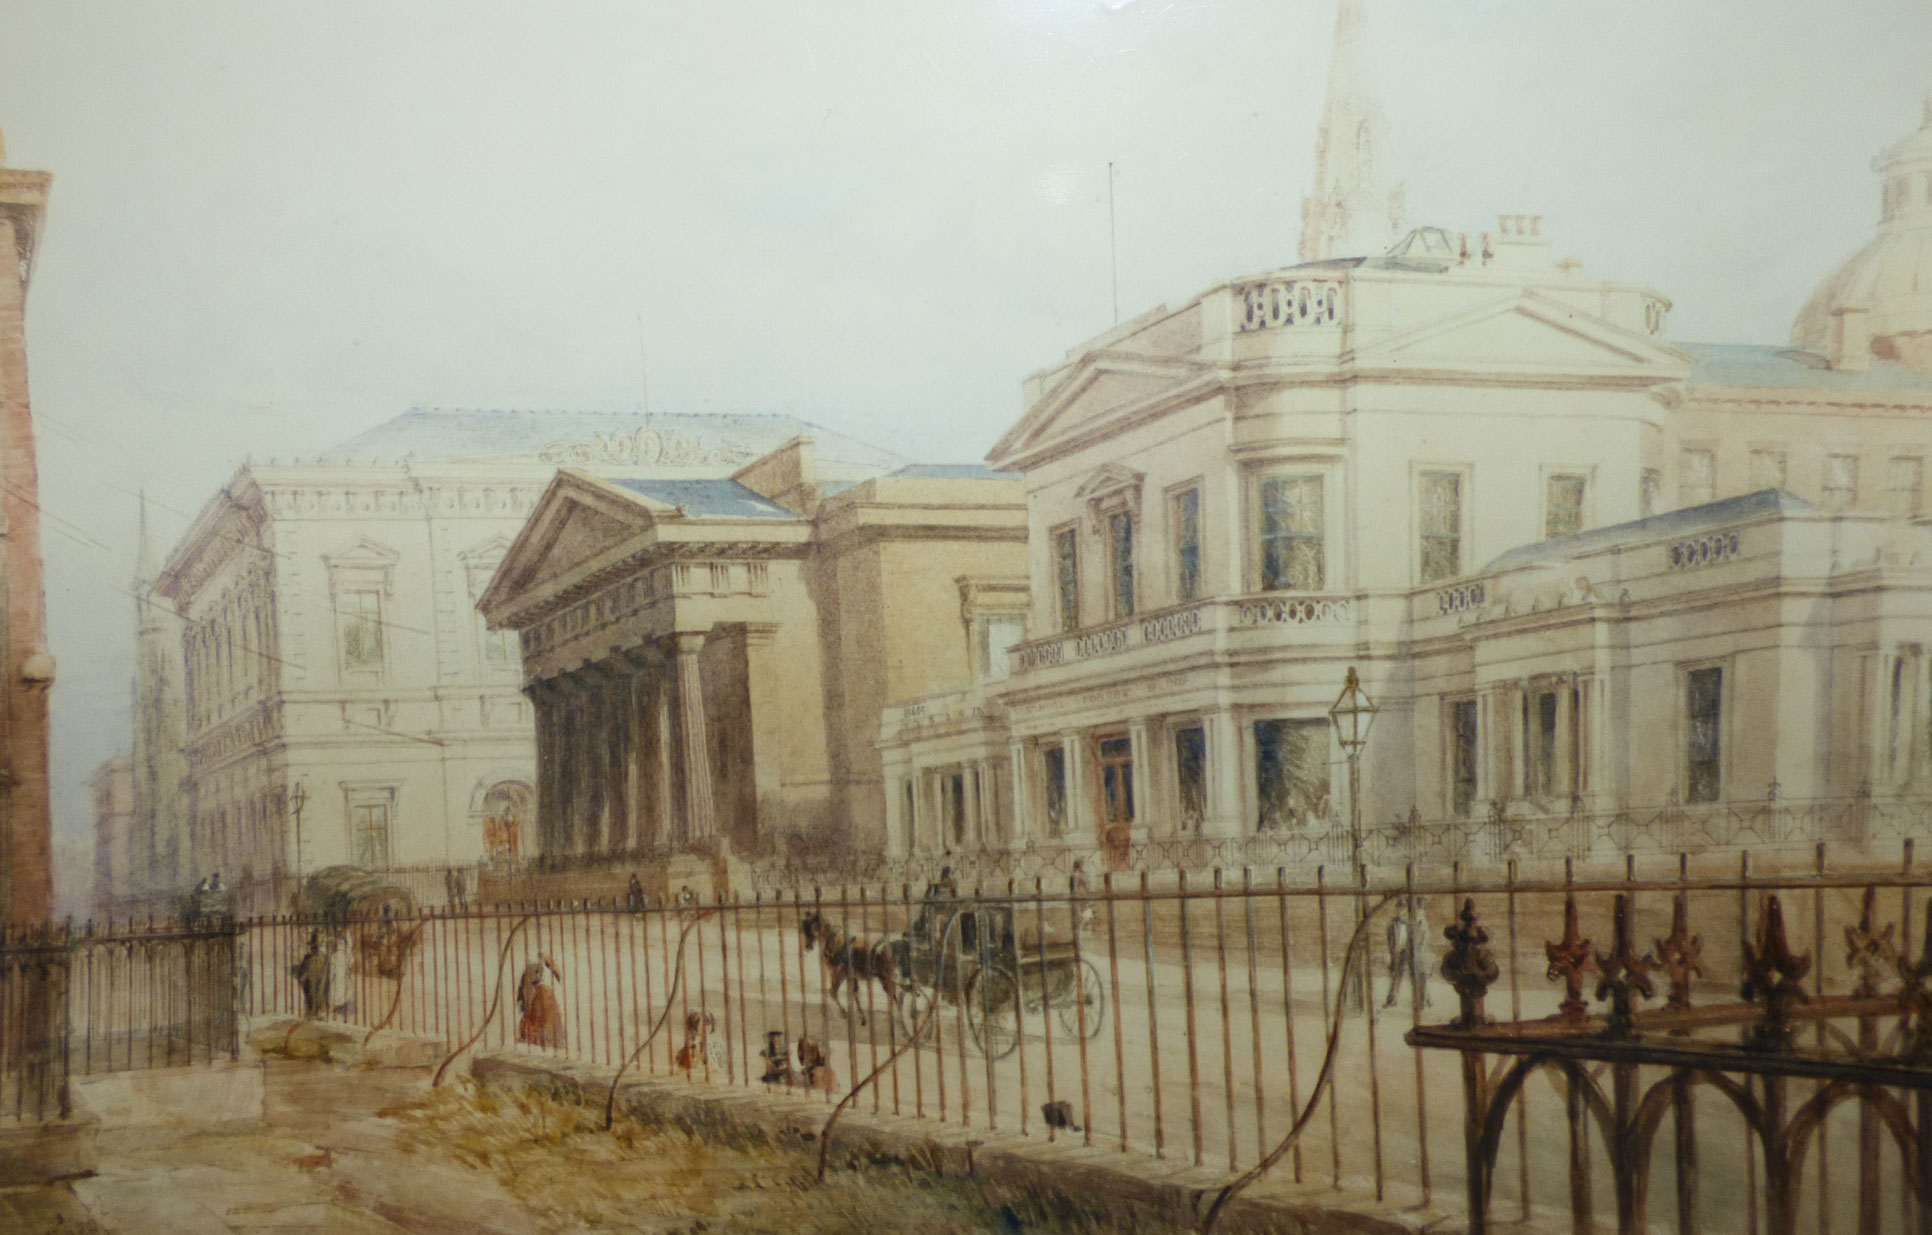 Painting shows the Hardman Street site including the chapel with Doric columns and a carriage passing along the street in front of the building.